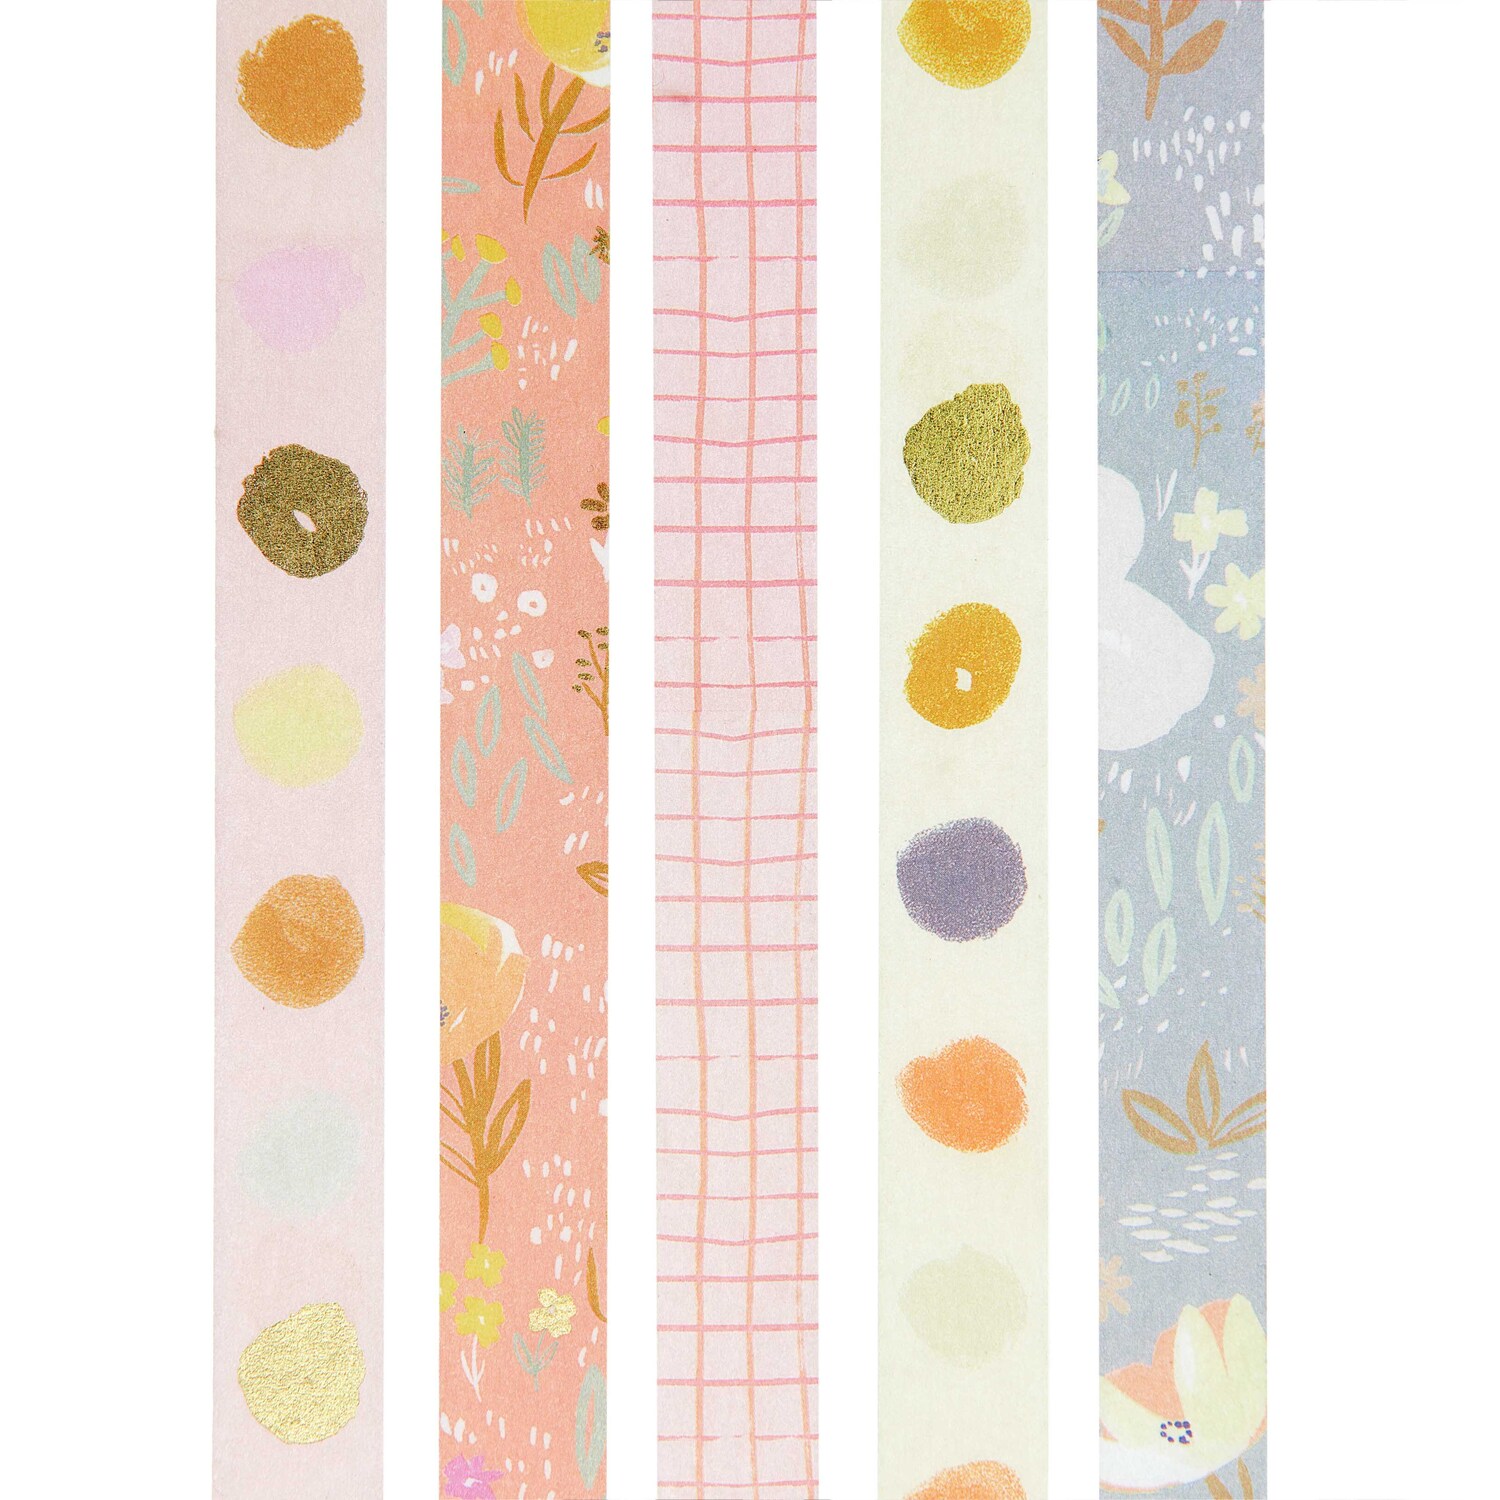 Paper Poetry Tape-Set Crafted Nature 1,5cm 10m 5 Stück